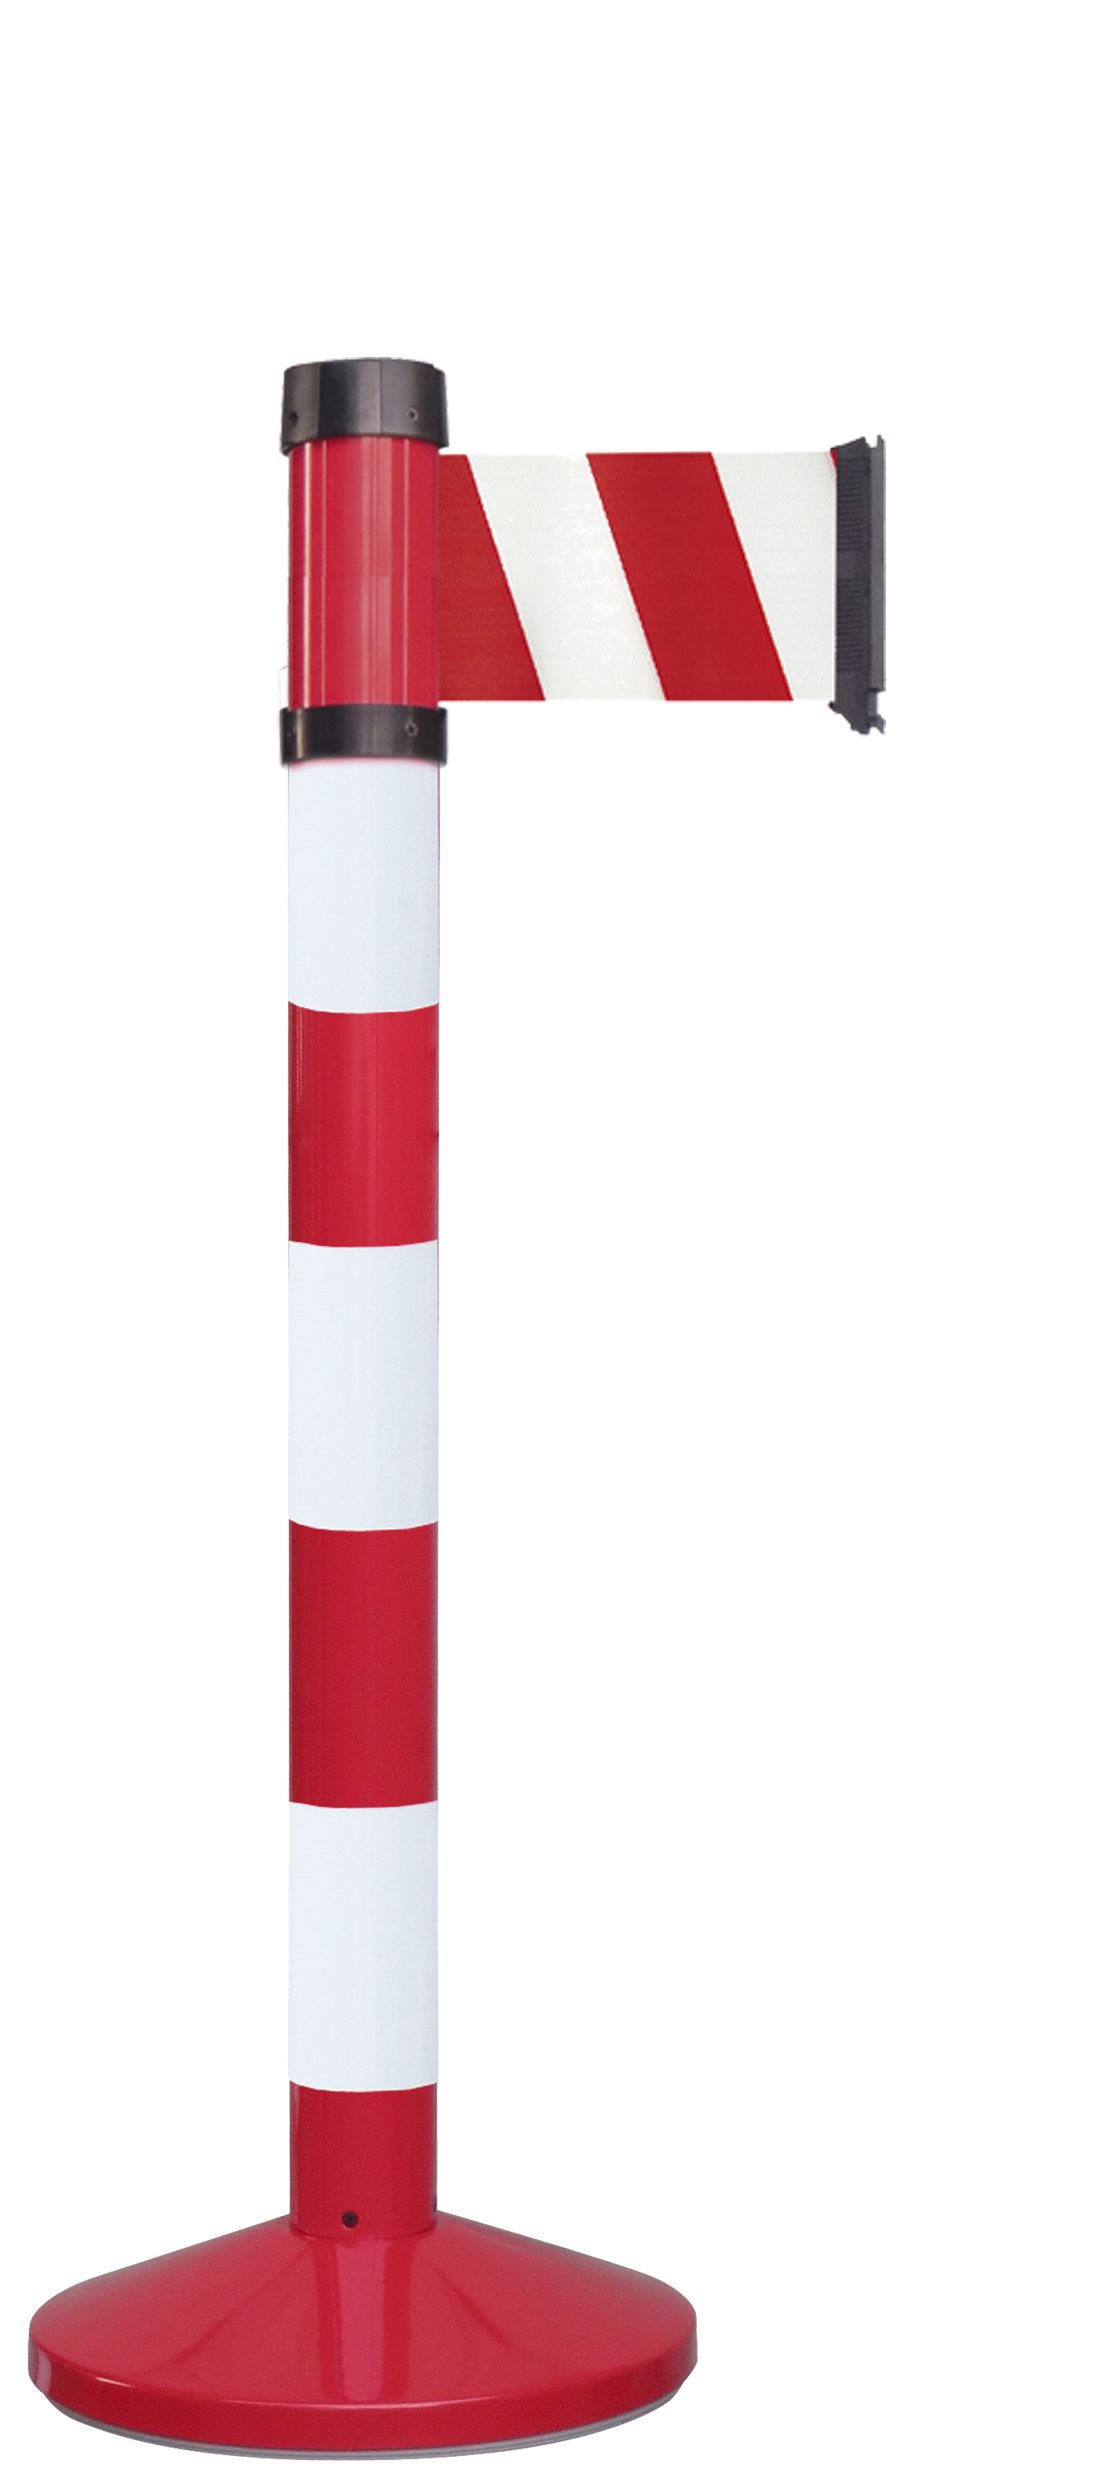 RS PRO Red Metal Retractable Barrier, 4m, Red, White Tape